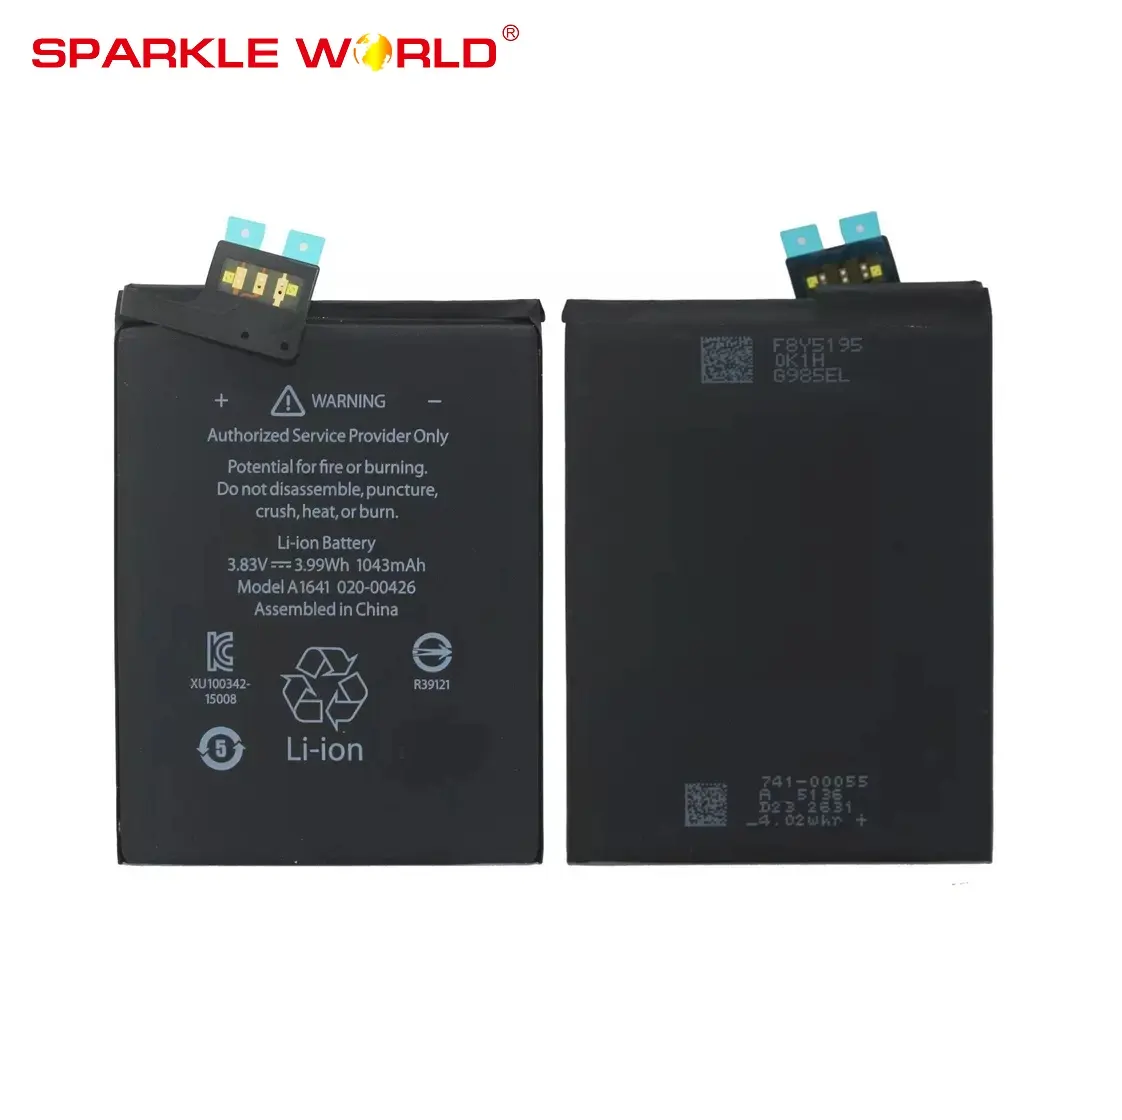 100% Original 1043mAh Batterie iPode a1137 160gb Nano 4th 5th 6th Gen Generation A1641 for iPod Touch 6 Battery